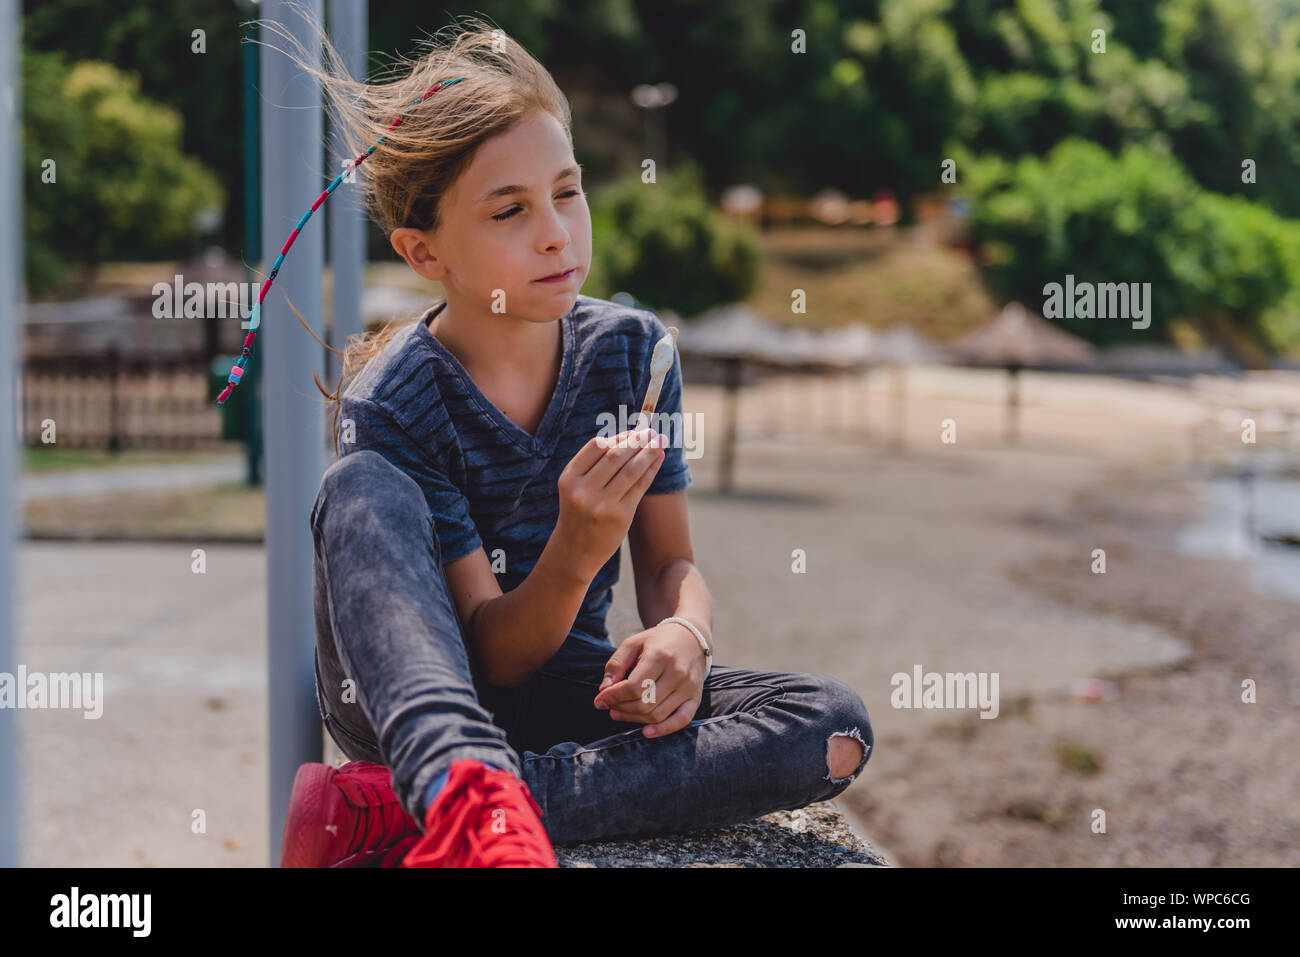 Girl sitting on a rampart and eating ice cream Stock Photo